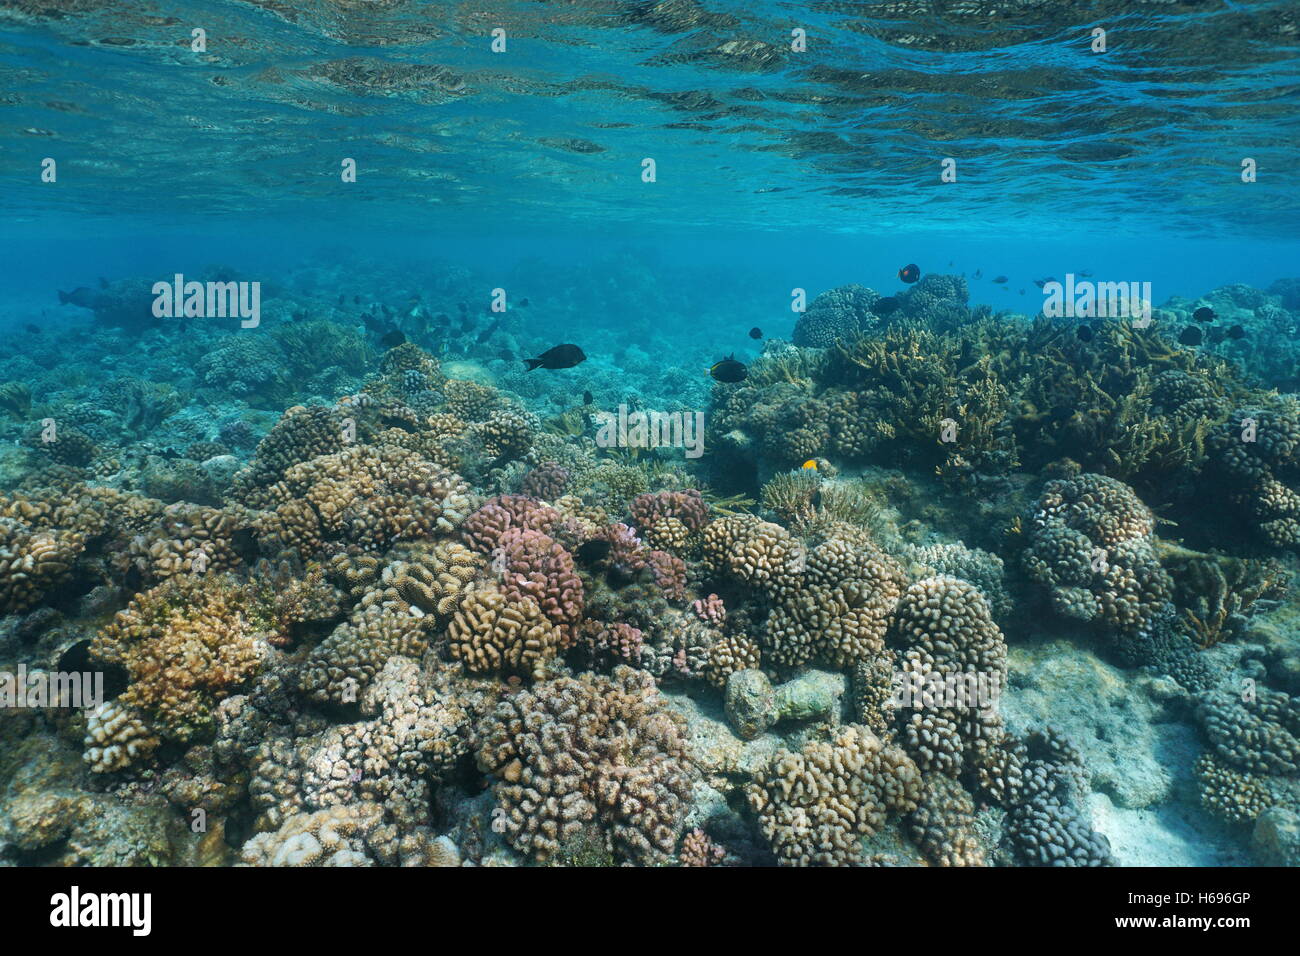 Coral reef under the sea in shallow water, natural scene, Pacific ocean, Rangiroa, Tuamotu, French Polynesia Stock Photo